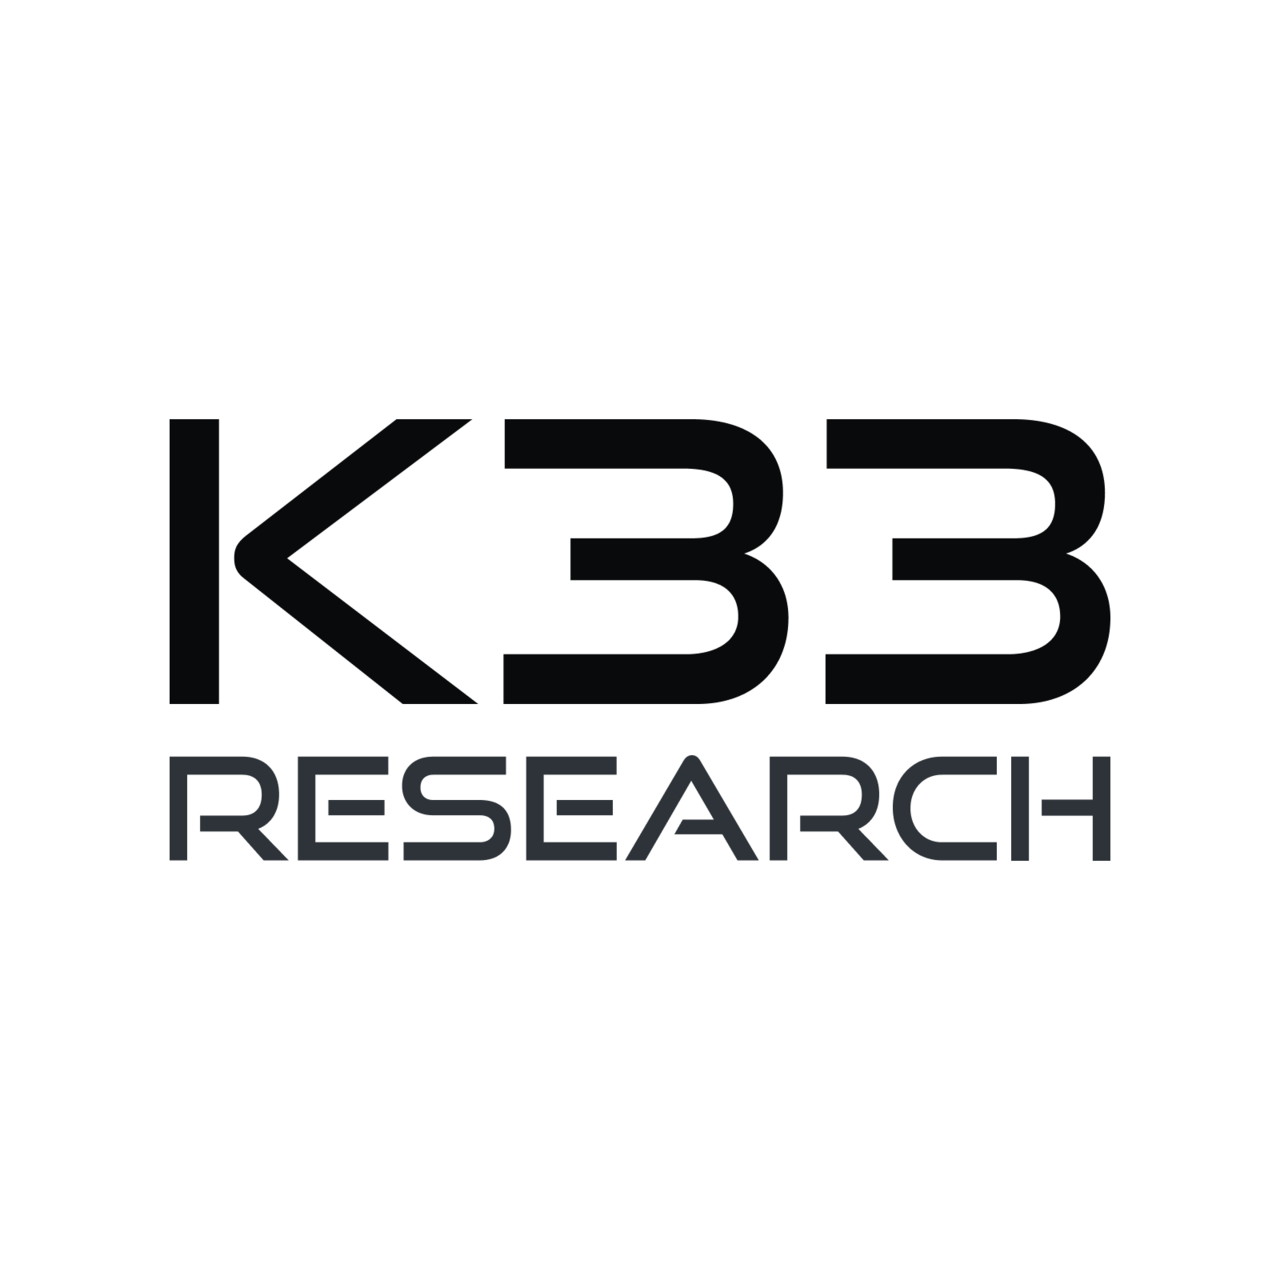 Artwork for K33 Research